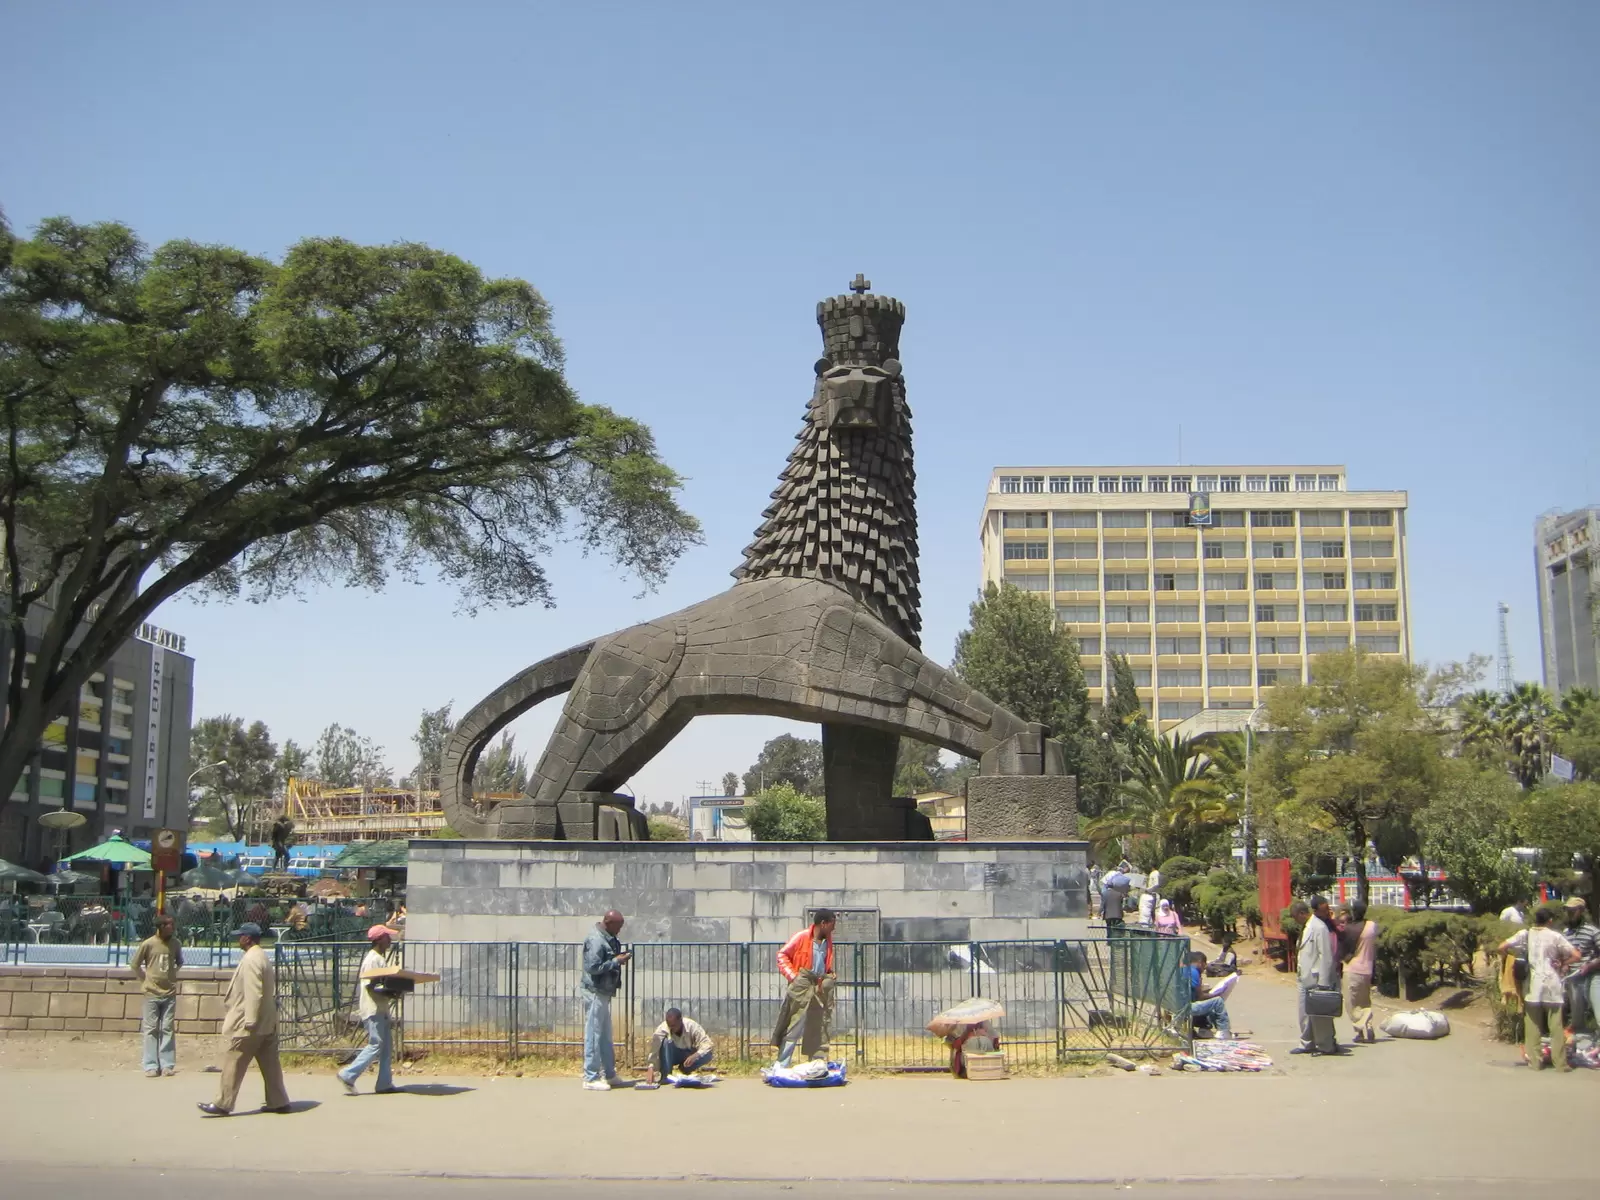 Things to do in Addis Ababa